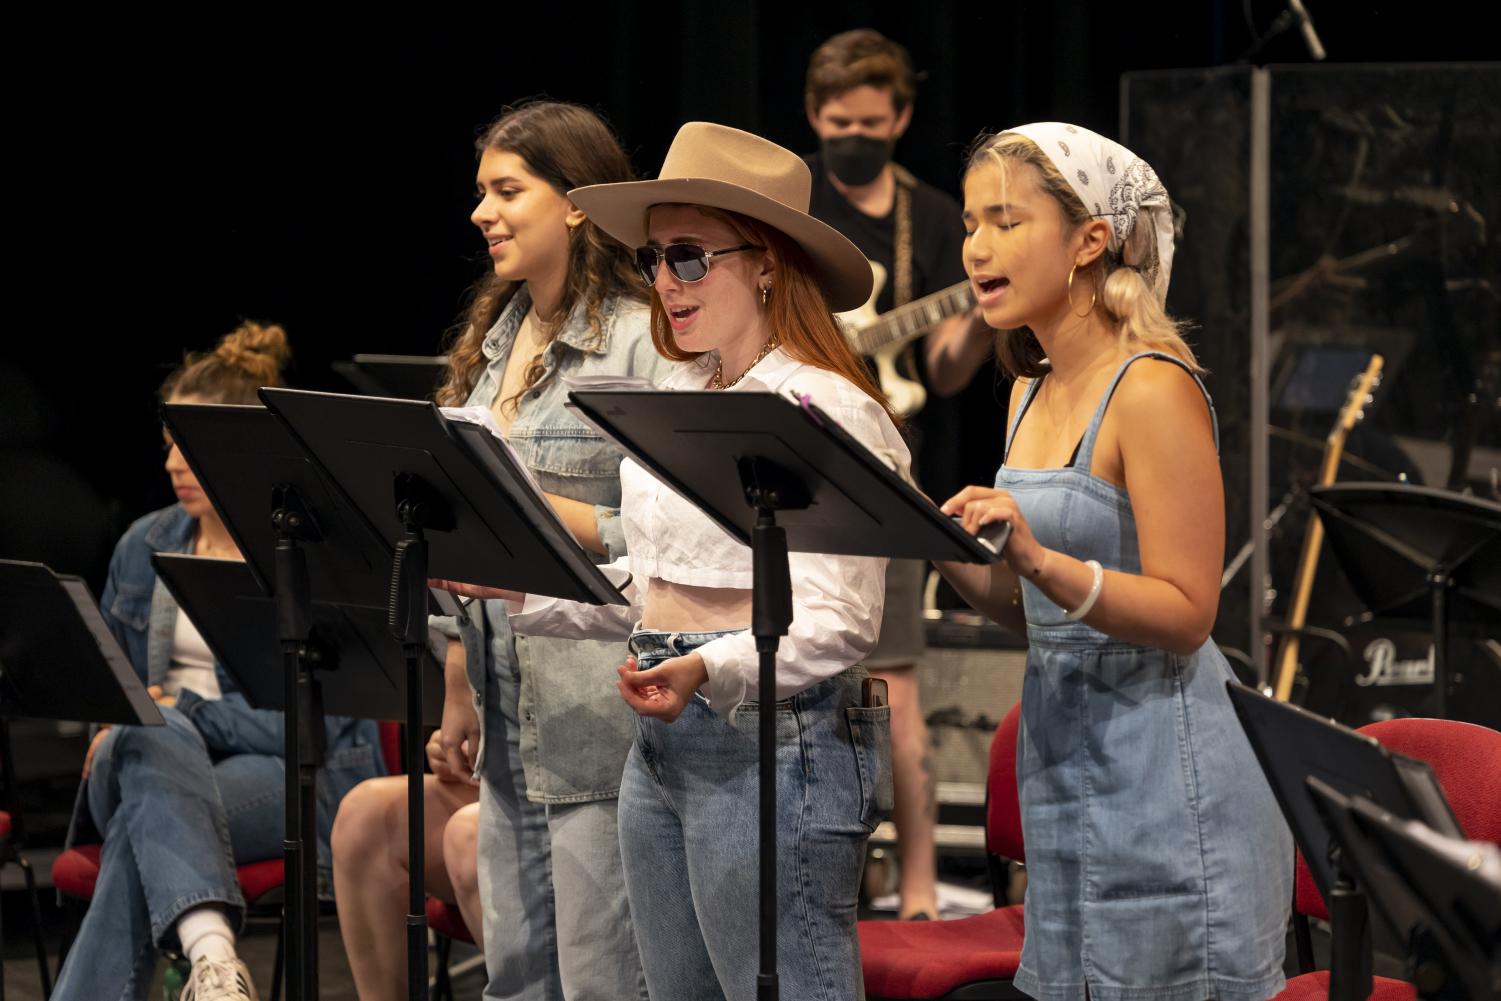 Three people wearing denim sing behind music stands. The middle person wears a cowboy hat and sunglasses.